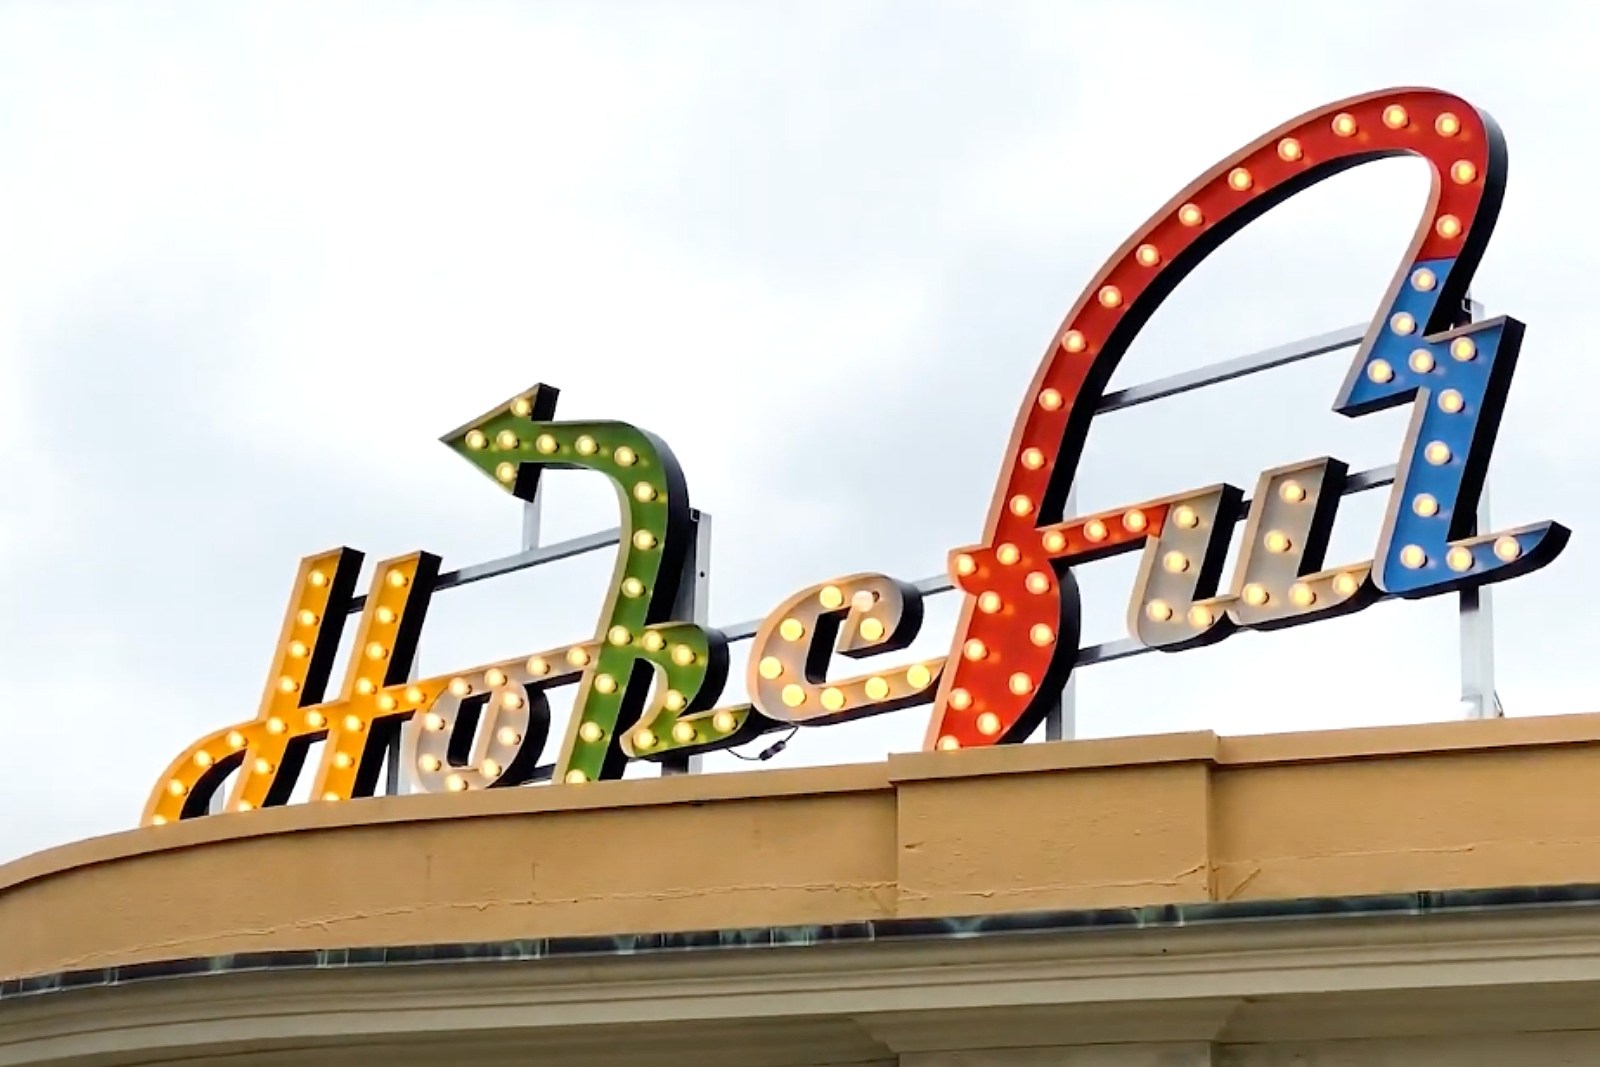 Here's where to find the best neon signs across the U.S. - Roadtrippers